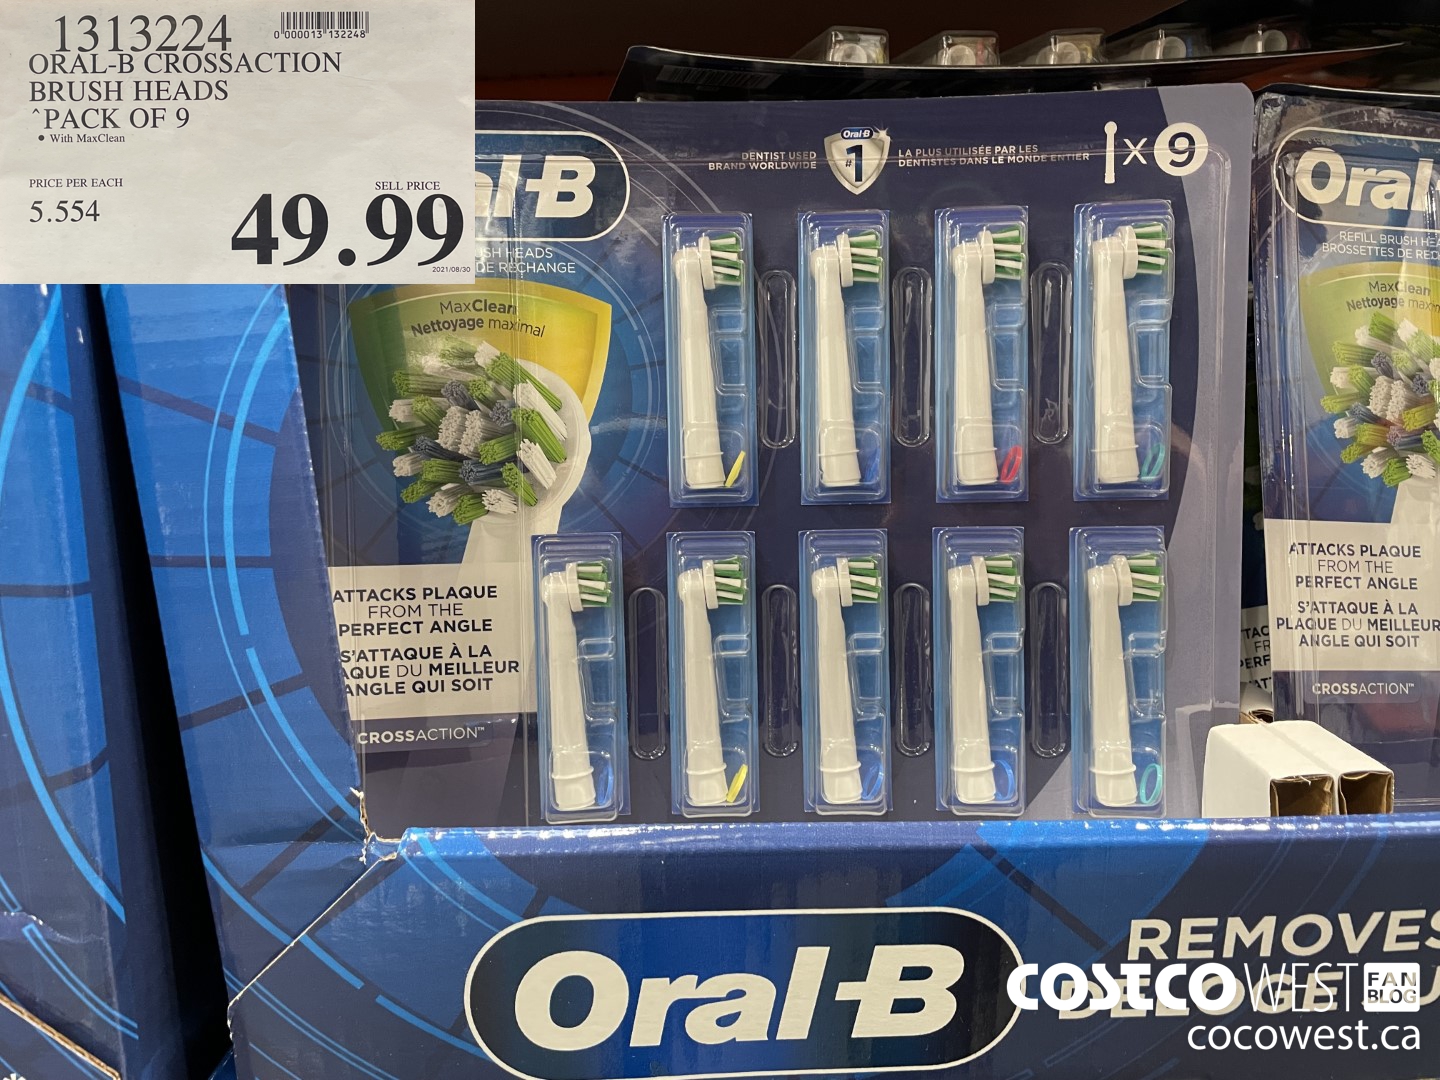 https://west.cocowest1.ca/2021/10/ORALB_CROSSACTION_BRUSH_HEADS_PACK_OF_9_20211026_74616.jpg